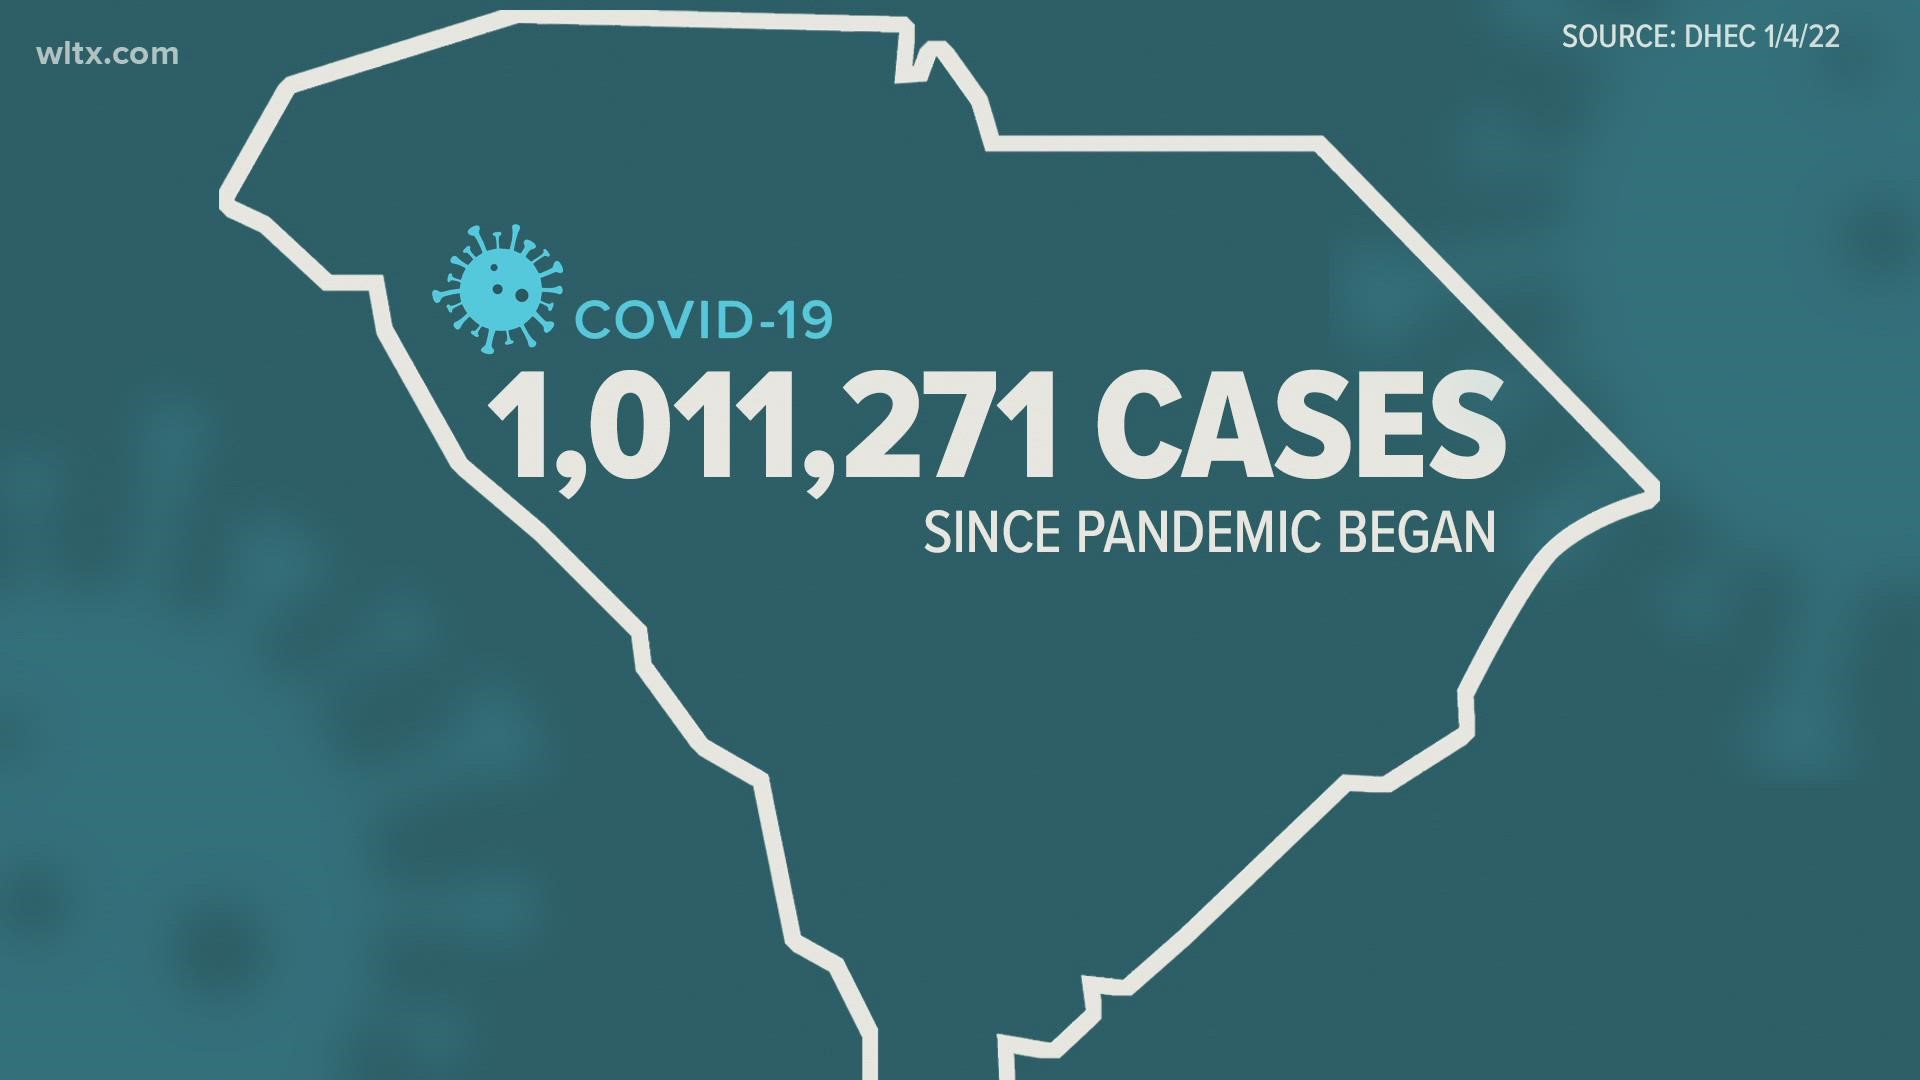 South Carolina has crossed 1 million total COVID cases and has set new weekly and daily records.